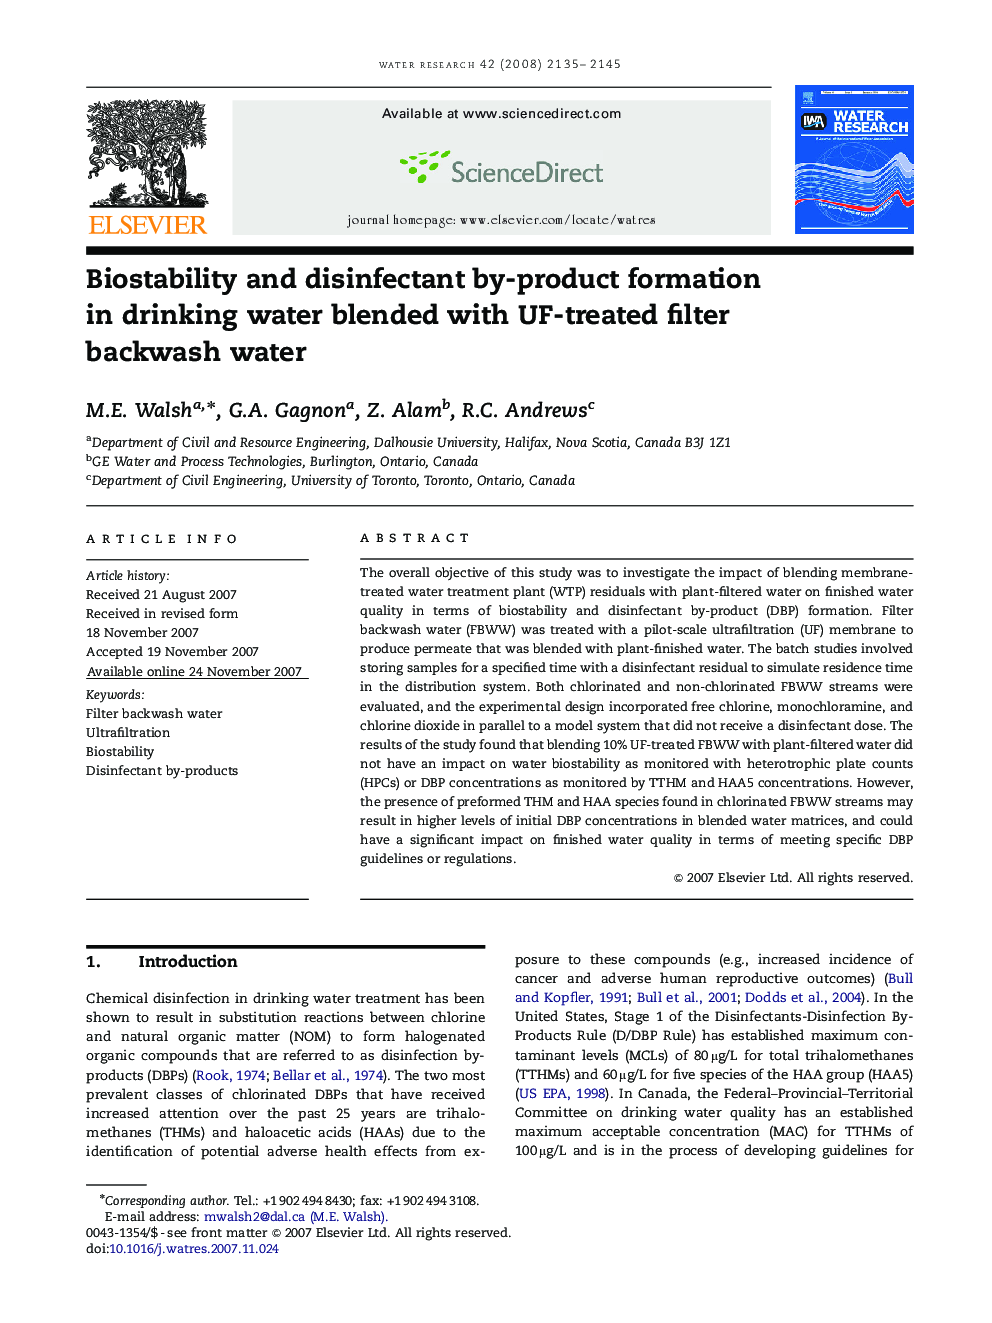 Biostability and disinfectant by-product formation in drinking water blended with UF-treated filter backwash water